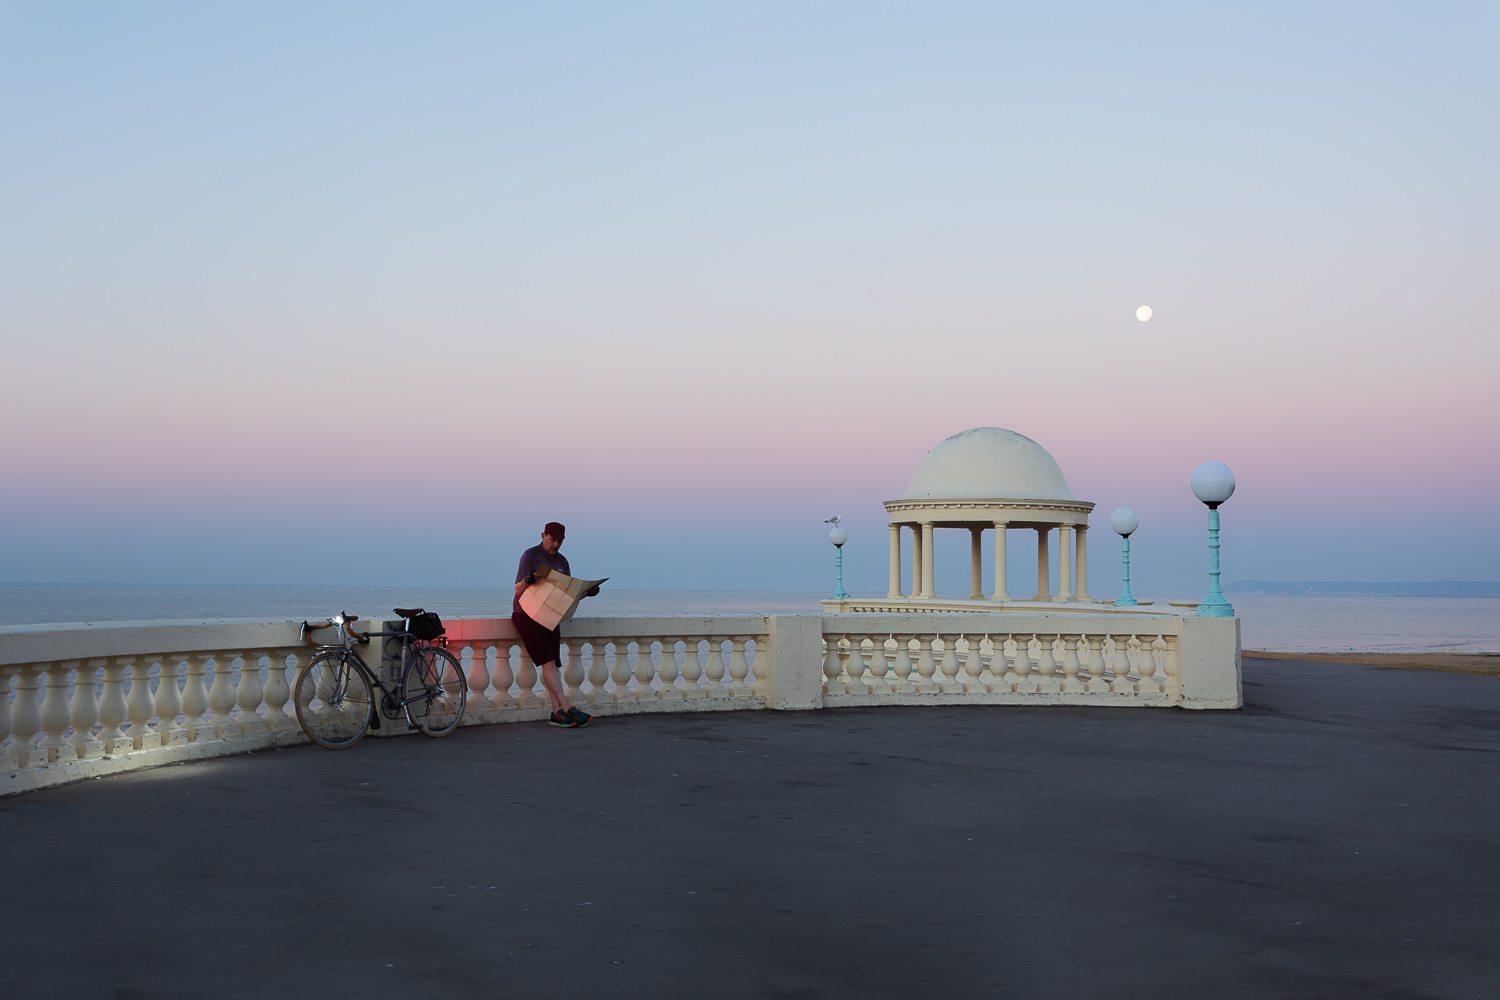 Cyclist reading map beside old seaside monument at dawn